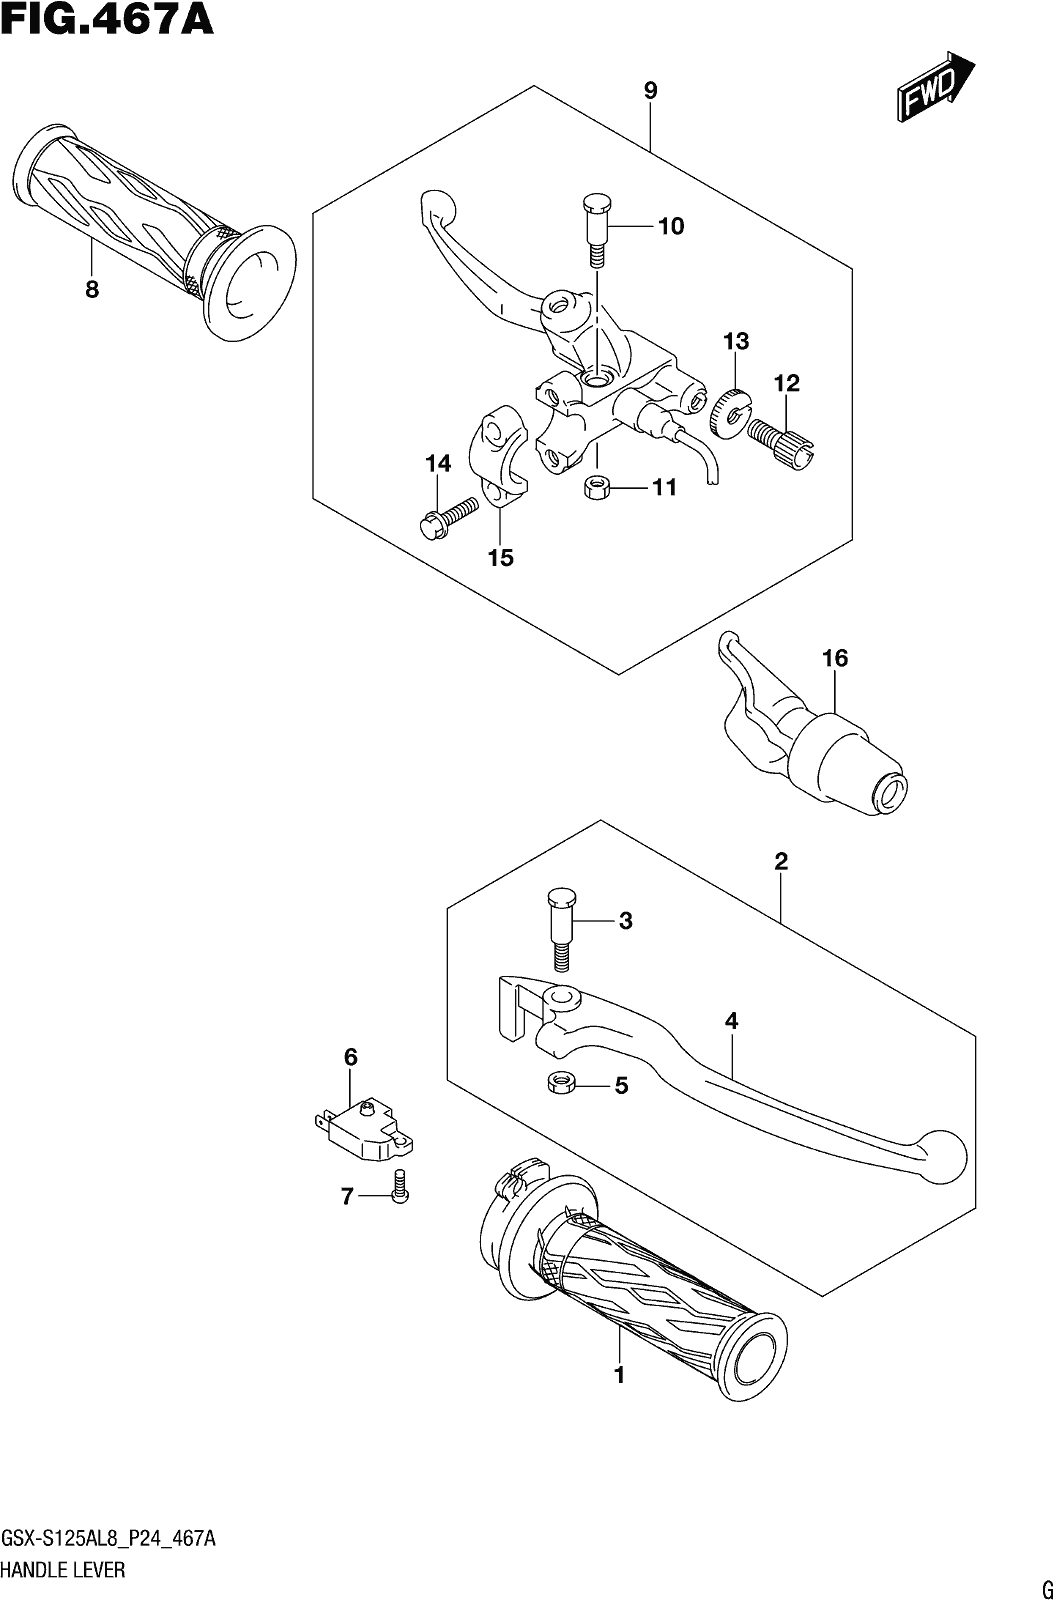 Fig.467a Handle Lever